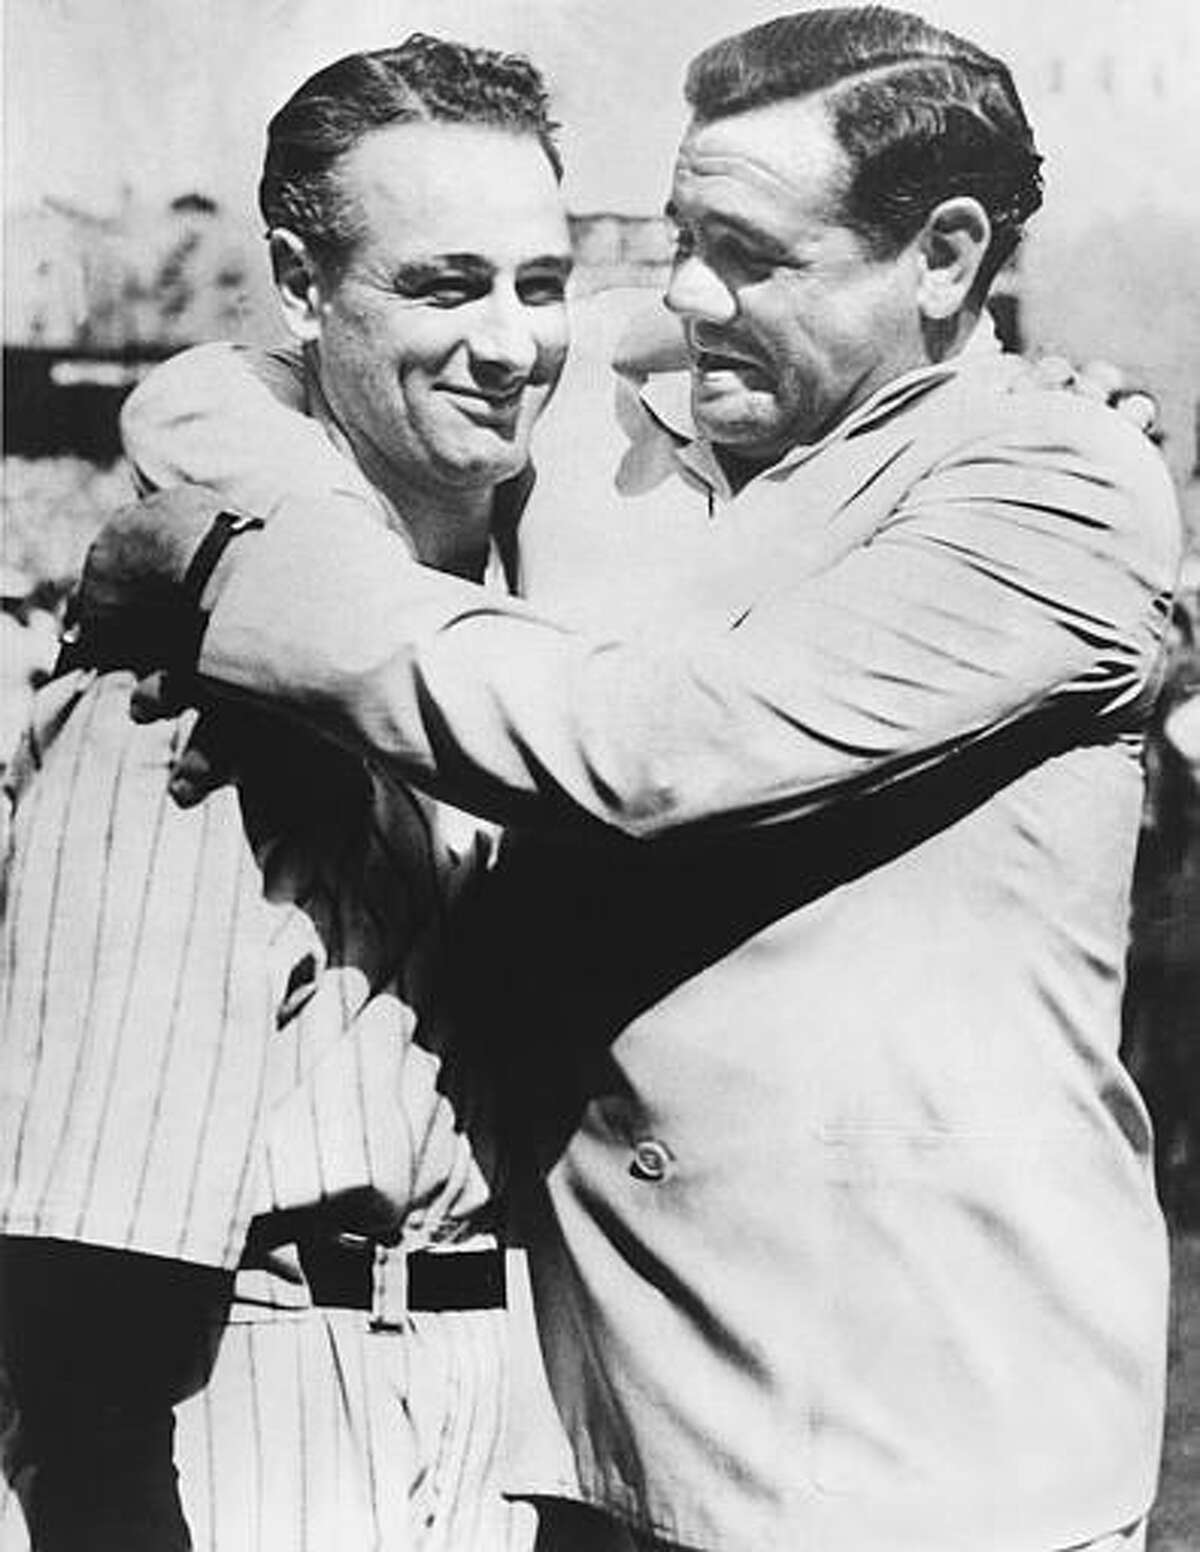 Babe Ruth, right, immortal New York Yankee baseball player comforts Lou Gehrig, who was almost too moved to speak to the vast throng which acclaimed him at Yankee Stadium July 4, 1939 where the Yankees met the Washington Senators in a doubleheader. Gehrig, famed iron man of the Yankees, was honored by players and fans. As an added honor, the world championship flag that the Yankees won in 1927 with a team hailed as one of baseball's greatest was unfurled at the stadium. (AP Photo)